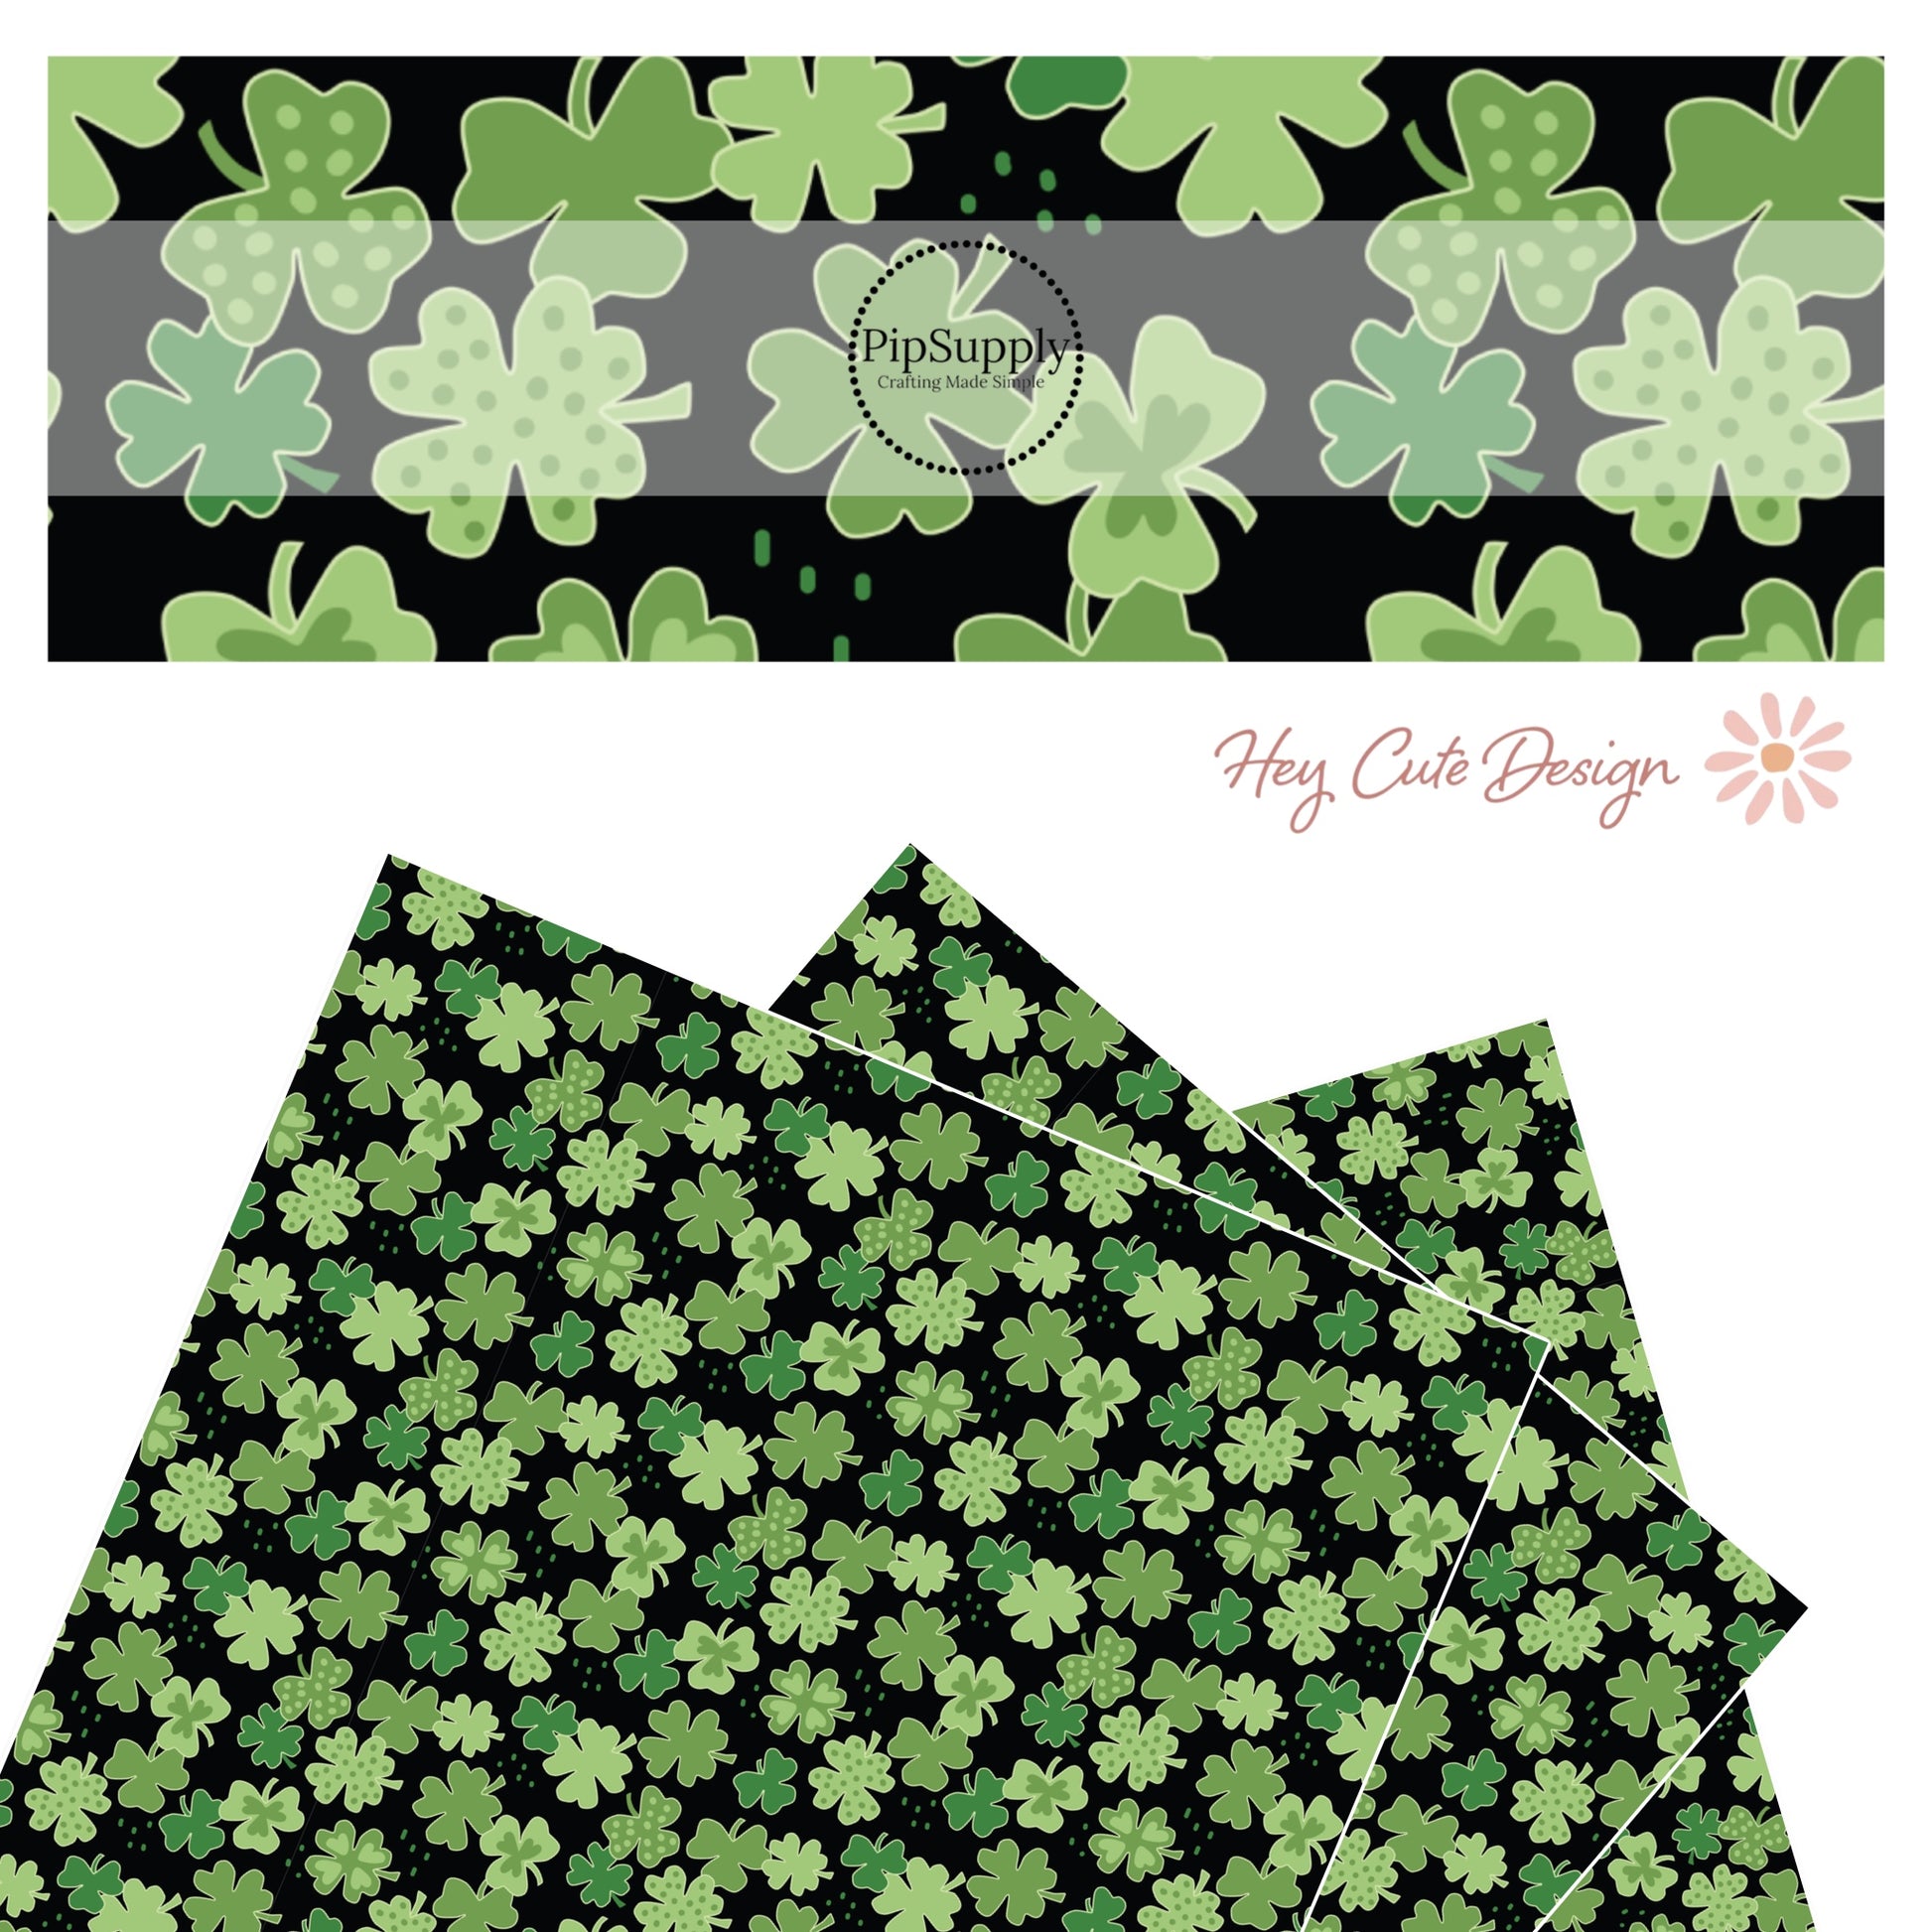 Green clovers outlined with light green and different shade green hearts and polka dots on a black faux leather sheet